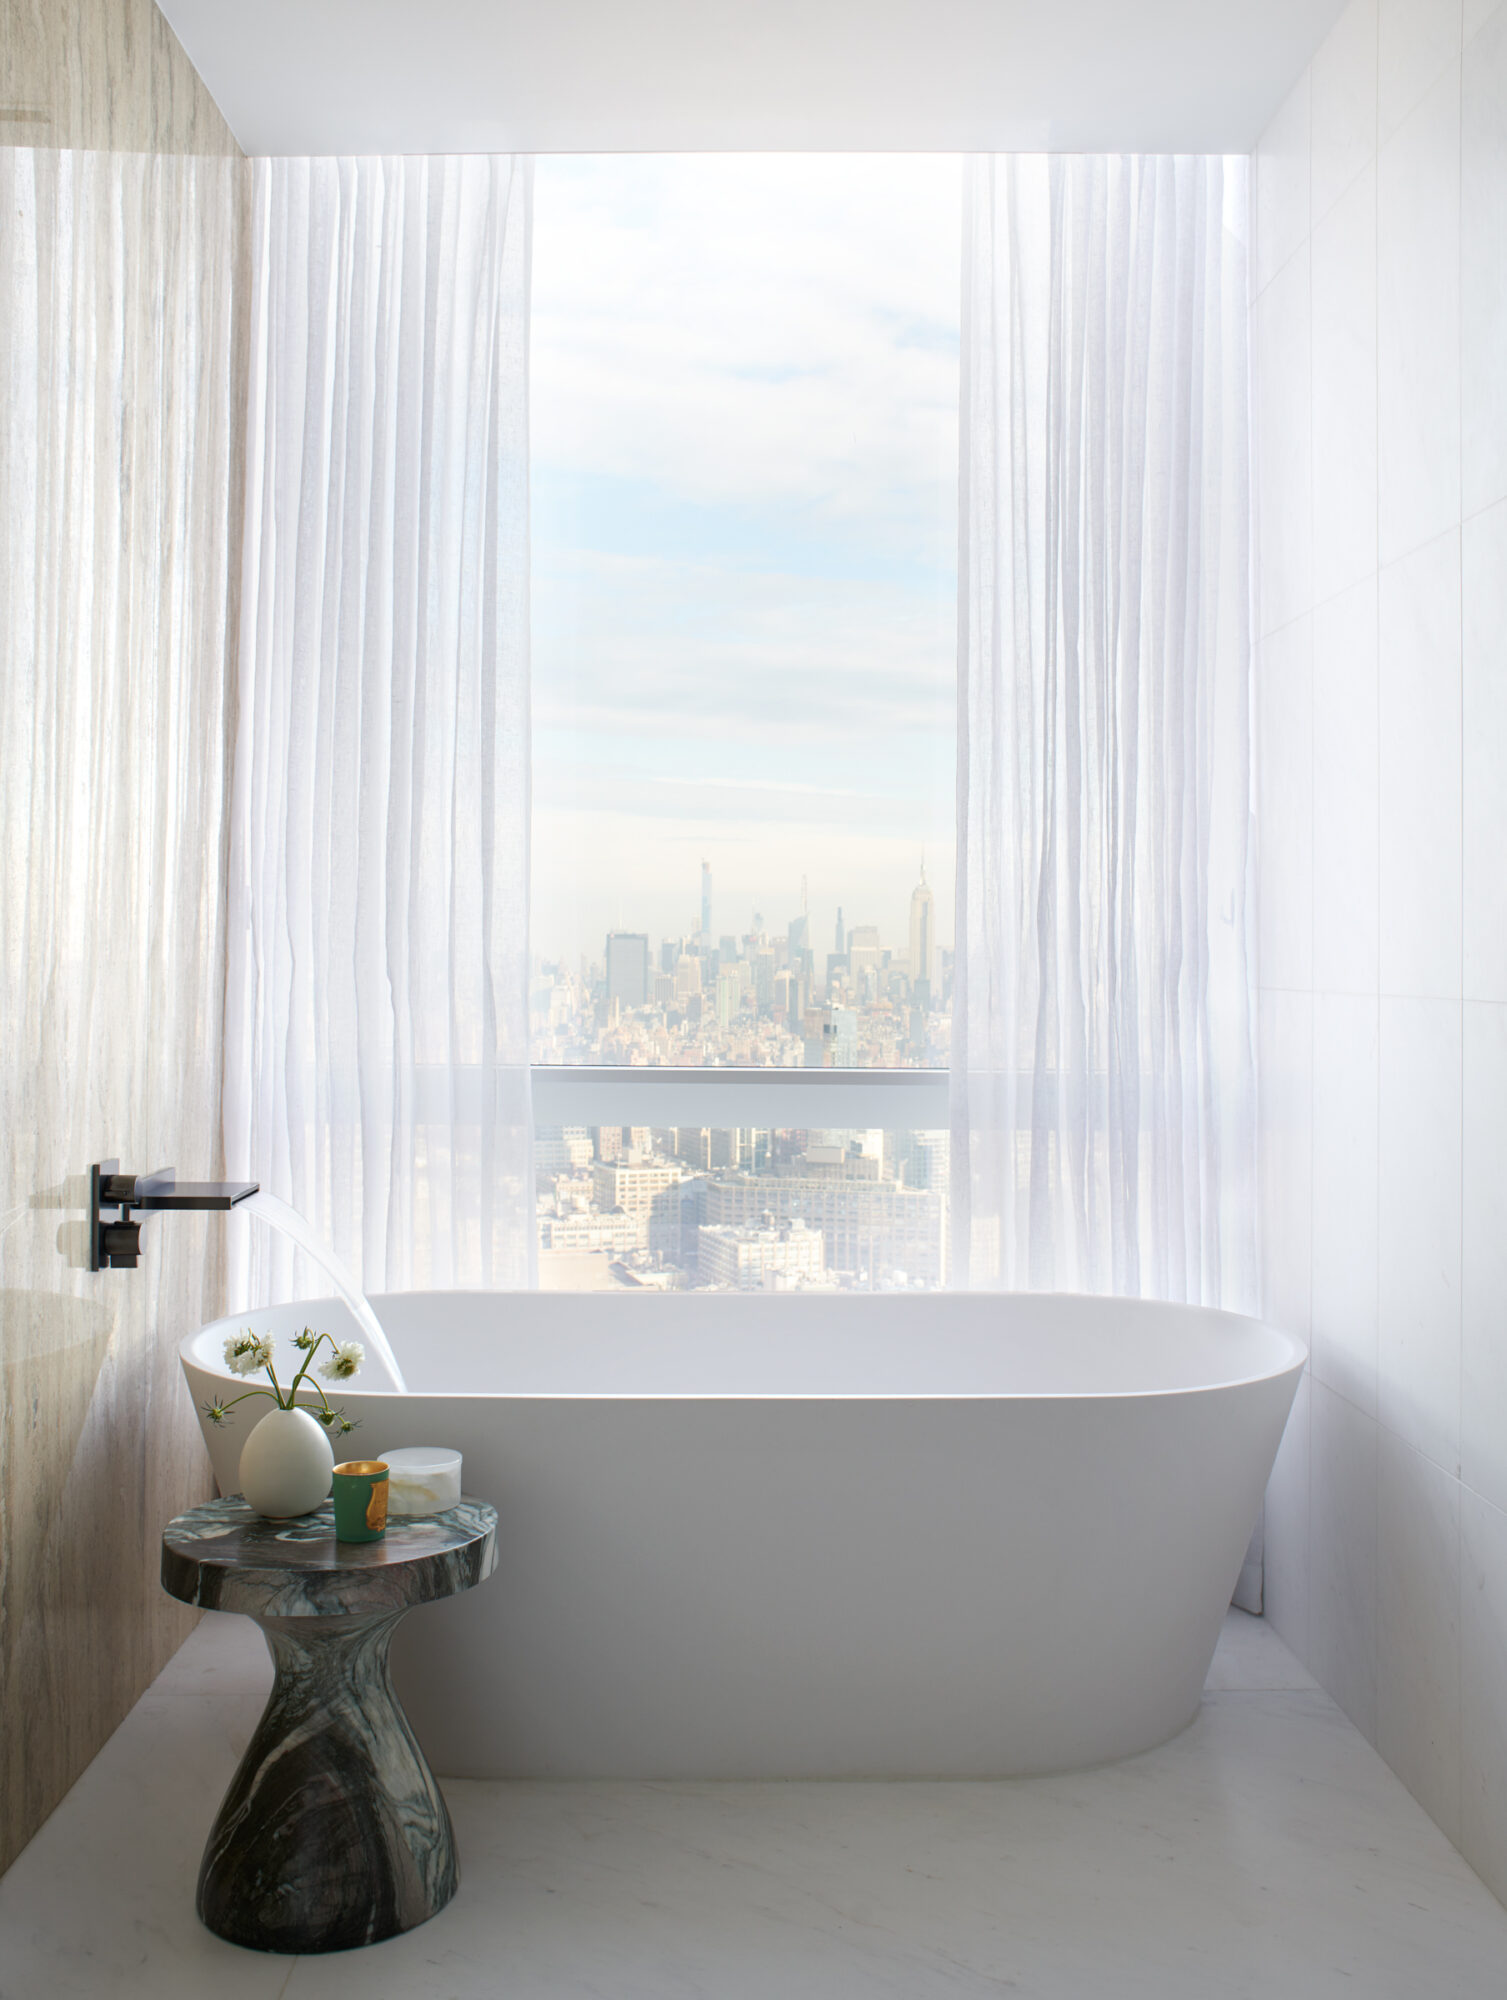 The city skyline is the perfect backdrop, even behind the bathtub